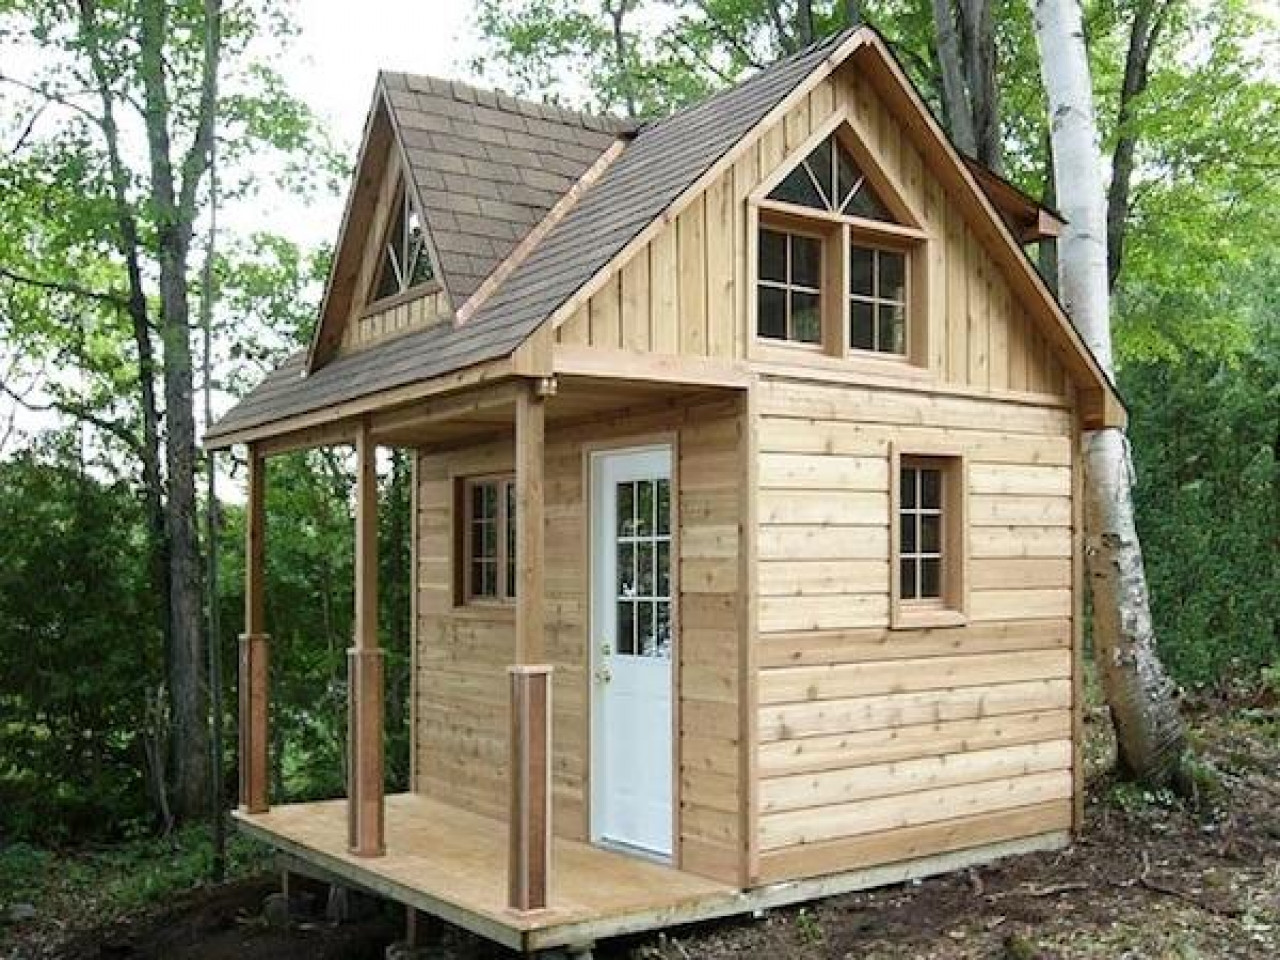 DIY Small Cabin Plans
 Small Cabin Plans with Loft Kits Inexpensive Small Cabin